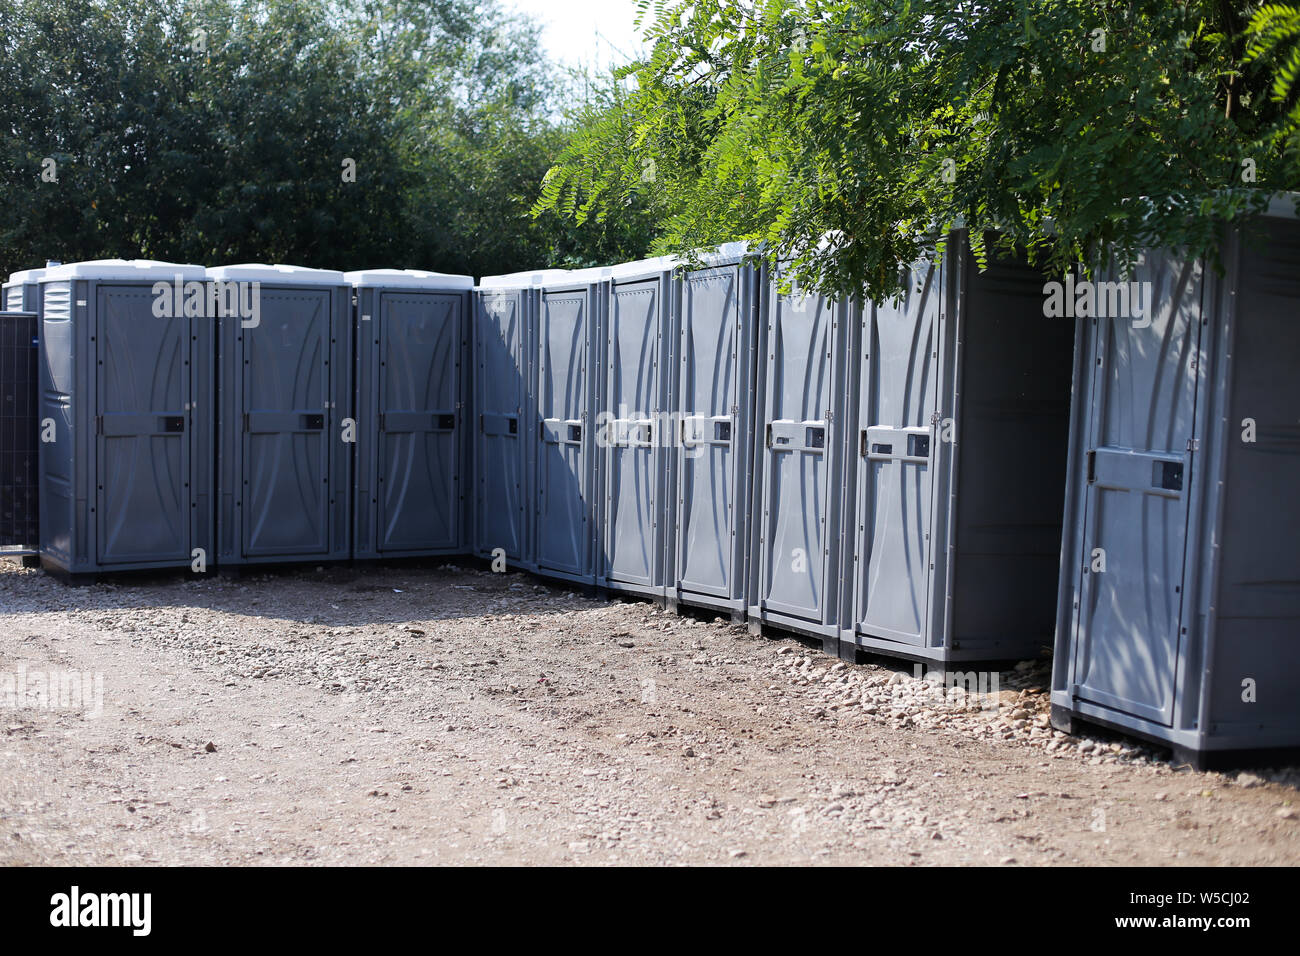 Ecological toilets in a row at a public event (music festival) Stock Photo